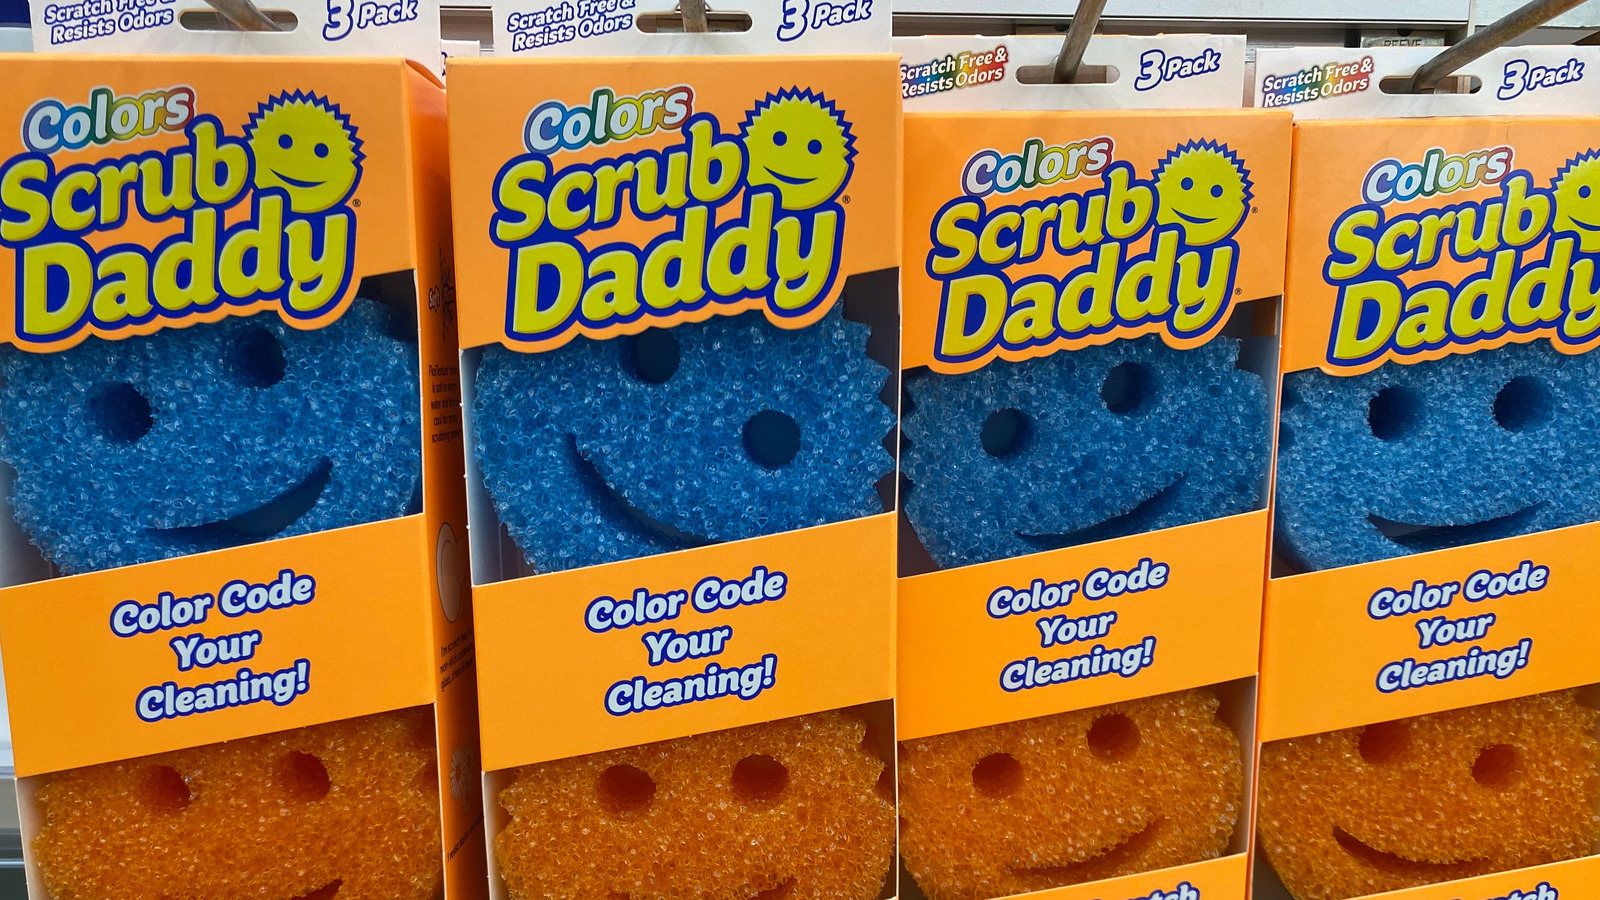 https://www.mashed.com/img/gallery/the-untold-truth-of-scrub-daddy/l-intro-1668017669.jpg